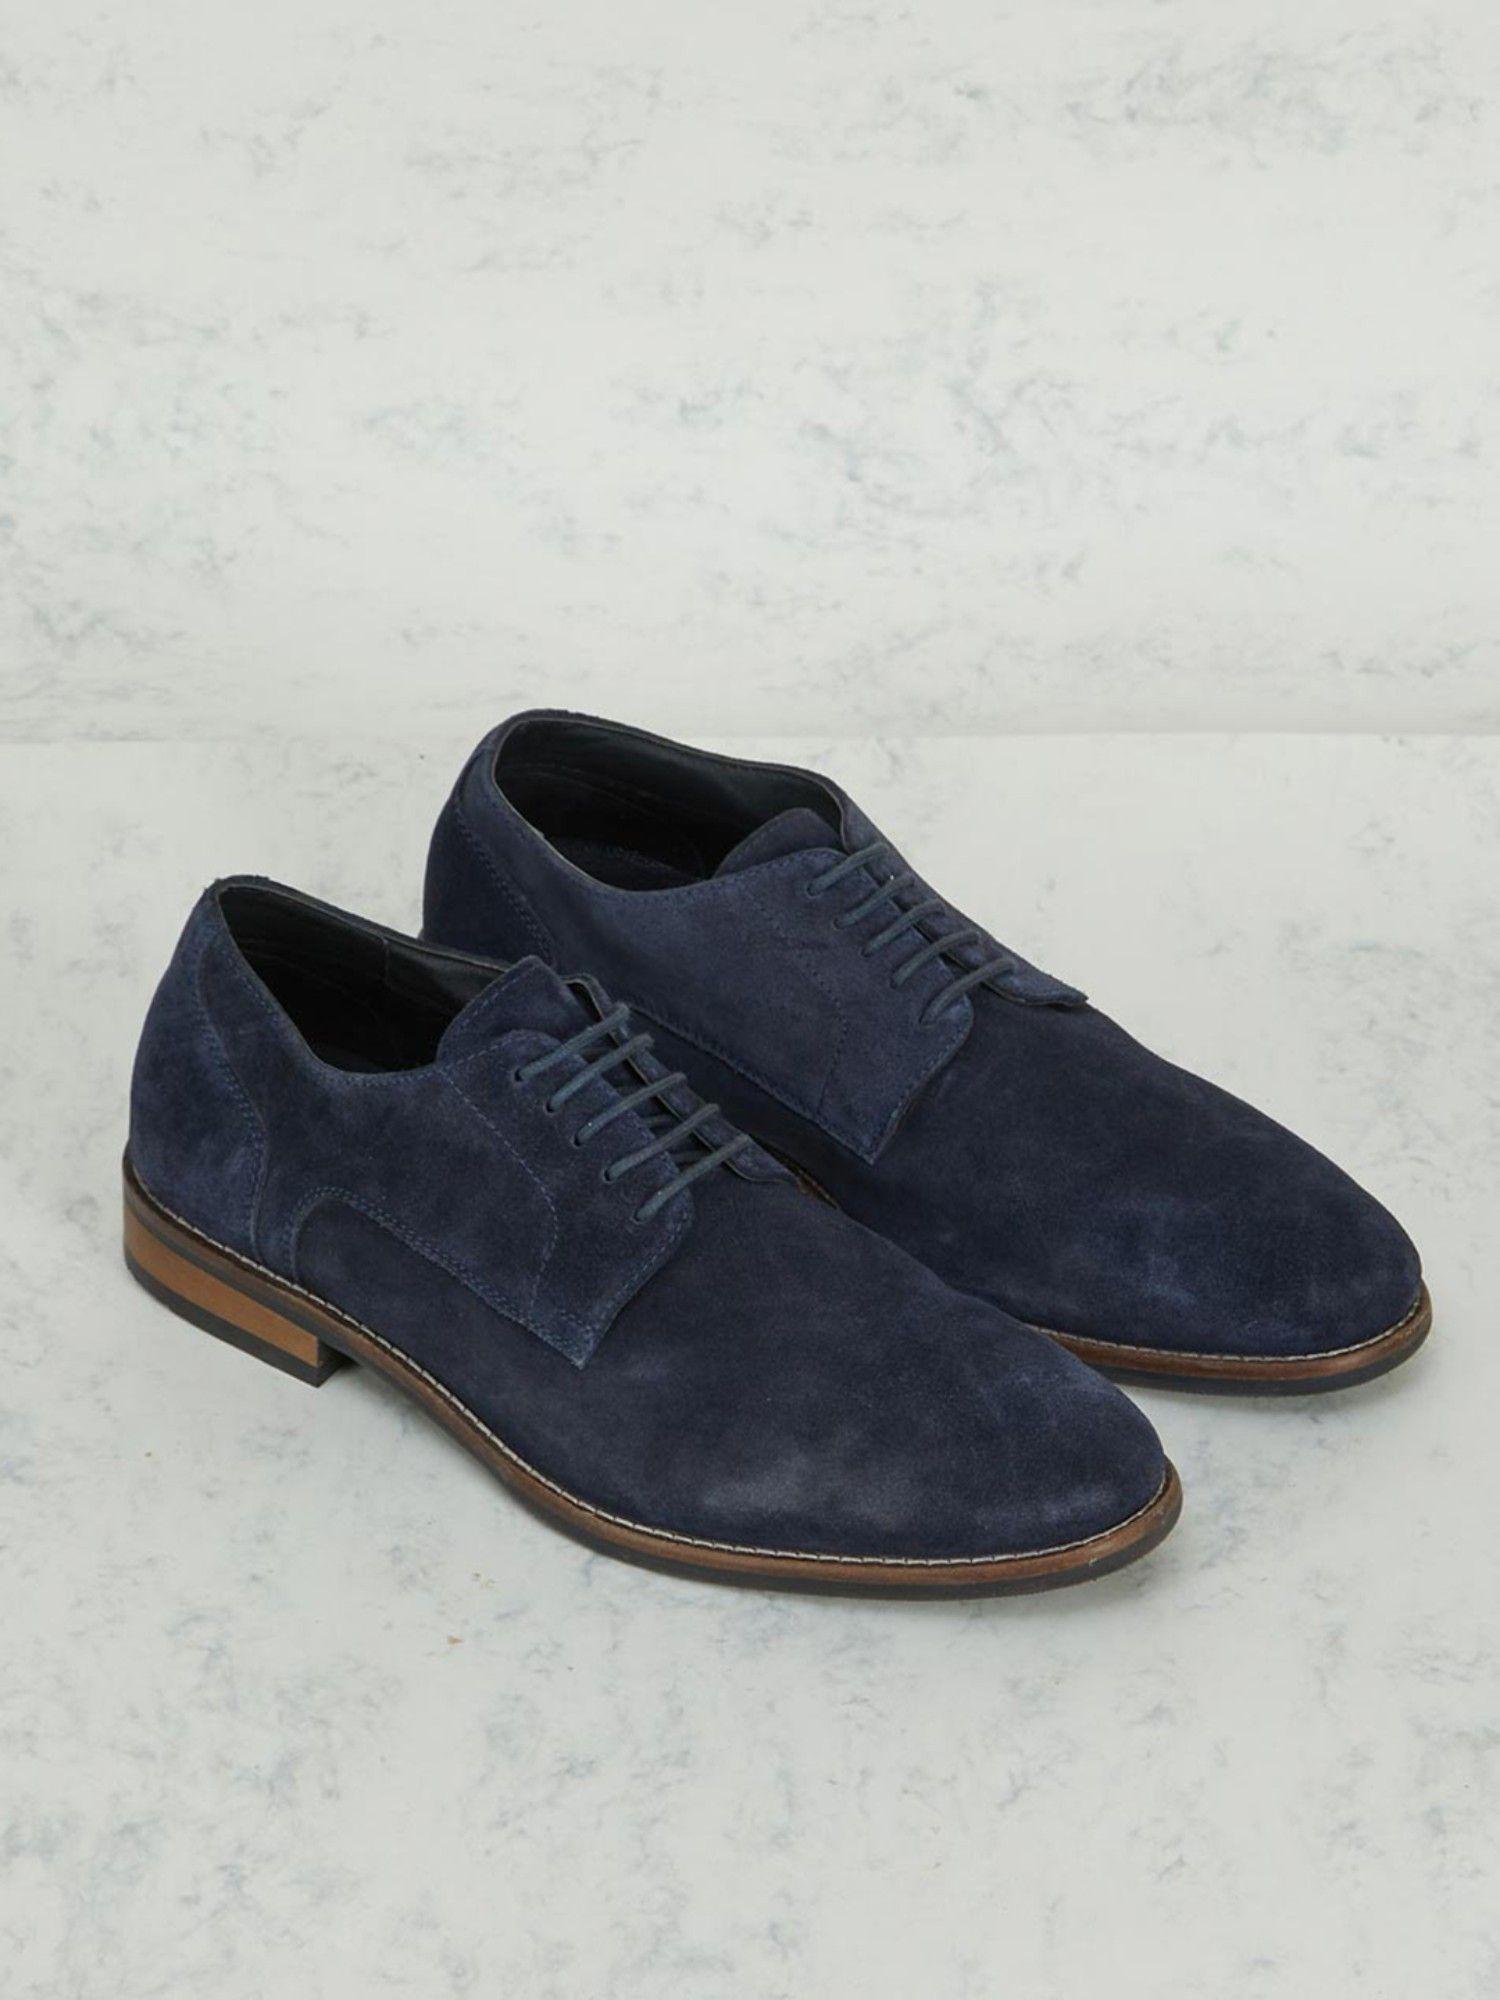 blue-suede-leather-derby-shoes